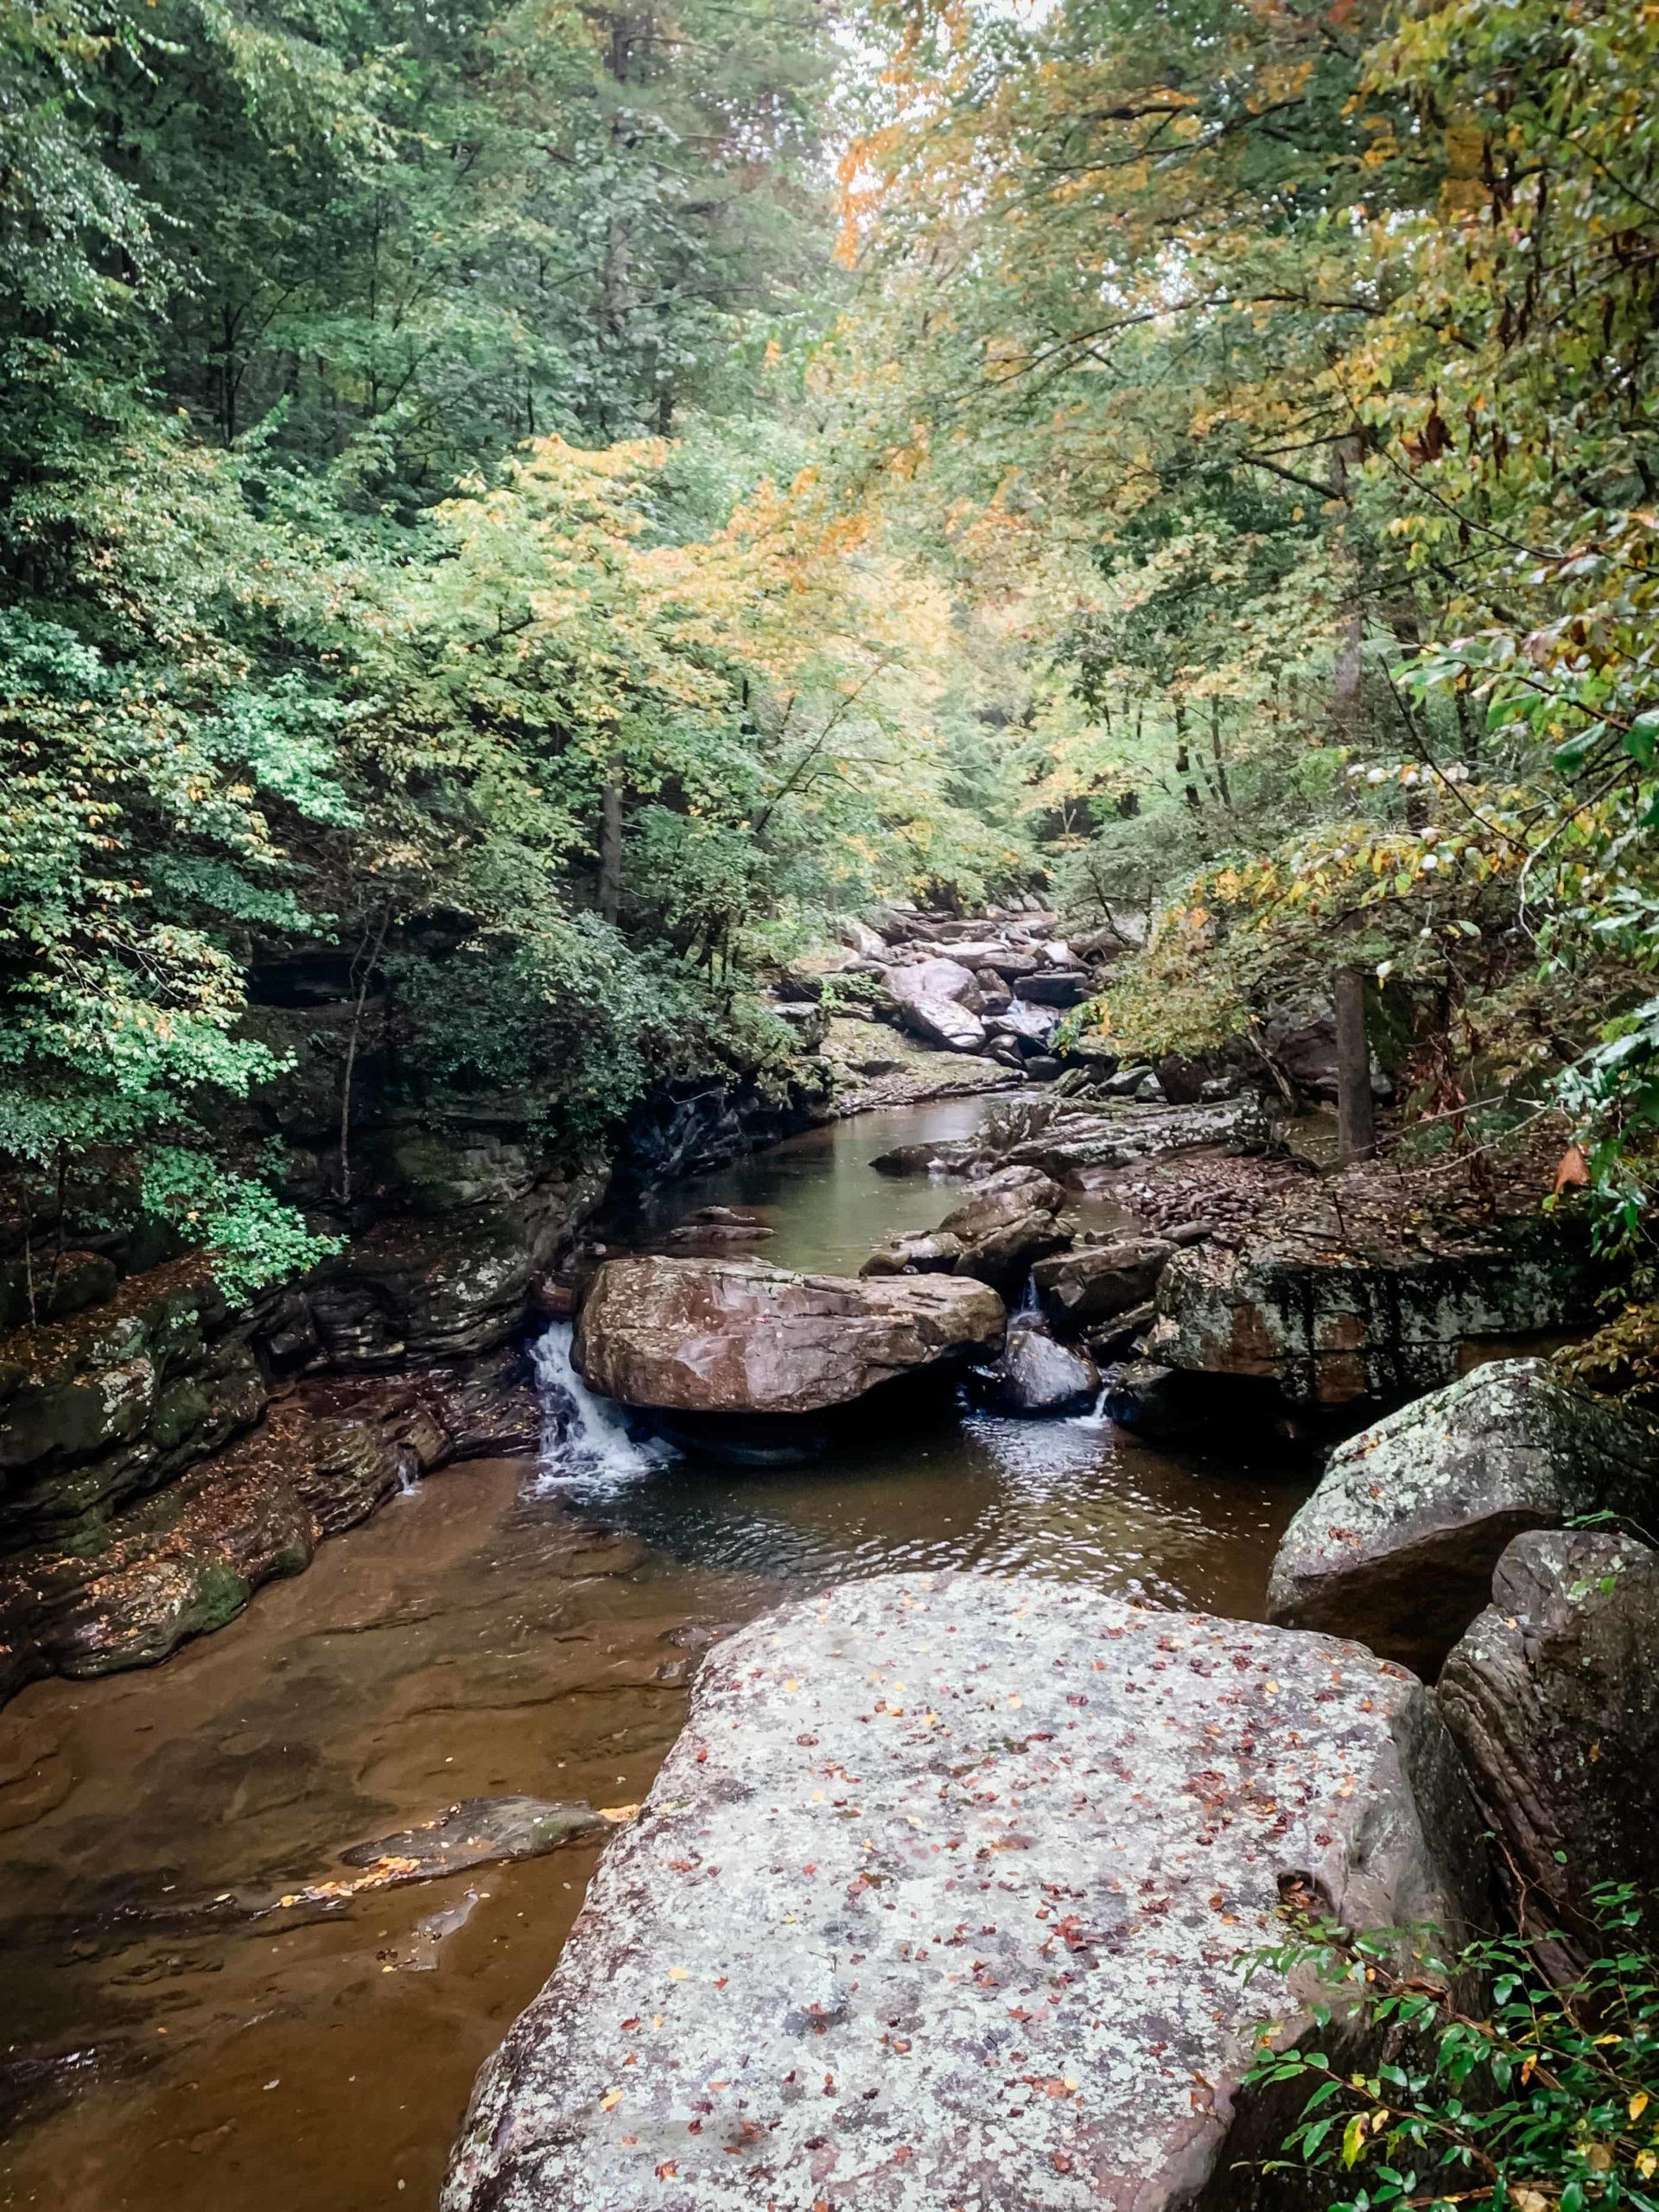 This is a picture of a river in a Tennessee forest. There are big boulders in the river and the trees are green with changing leaves, turning yellow.